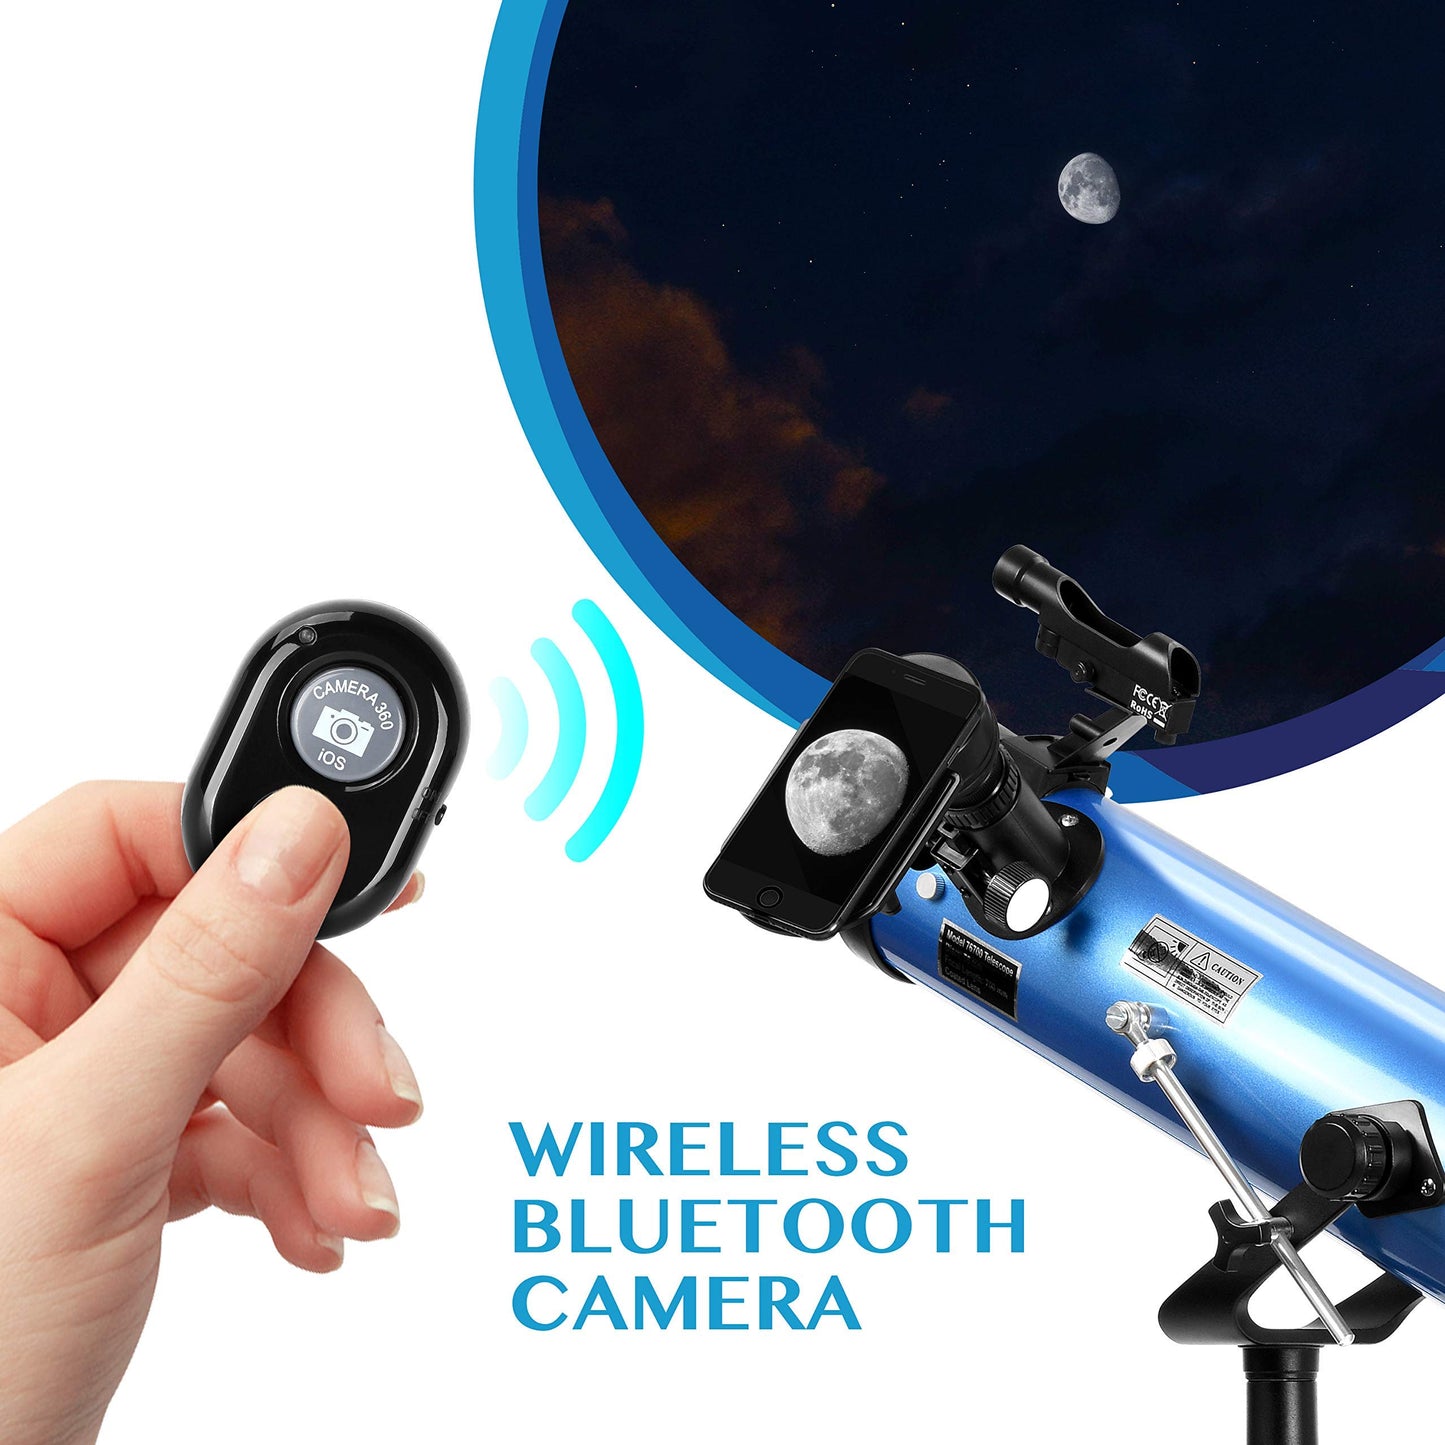 70076 Reflector Telescopes with High Tripod Phone Holder 210X for Moon Watching